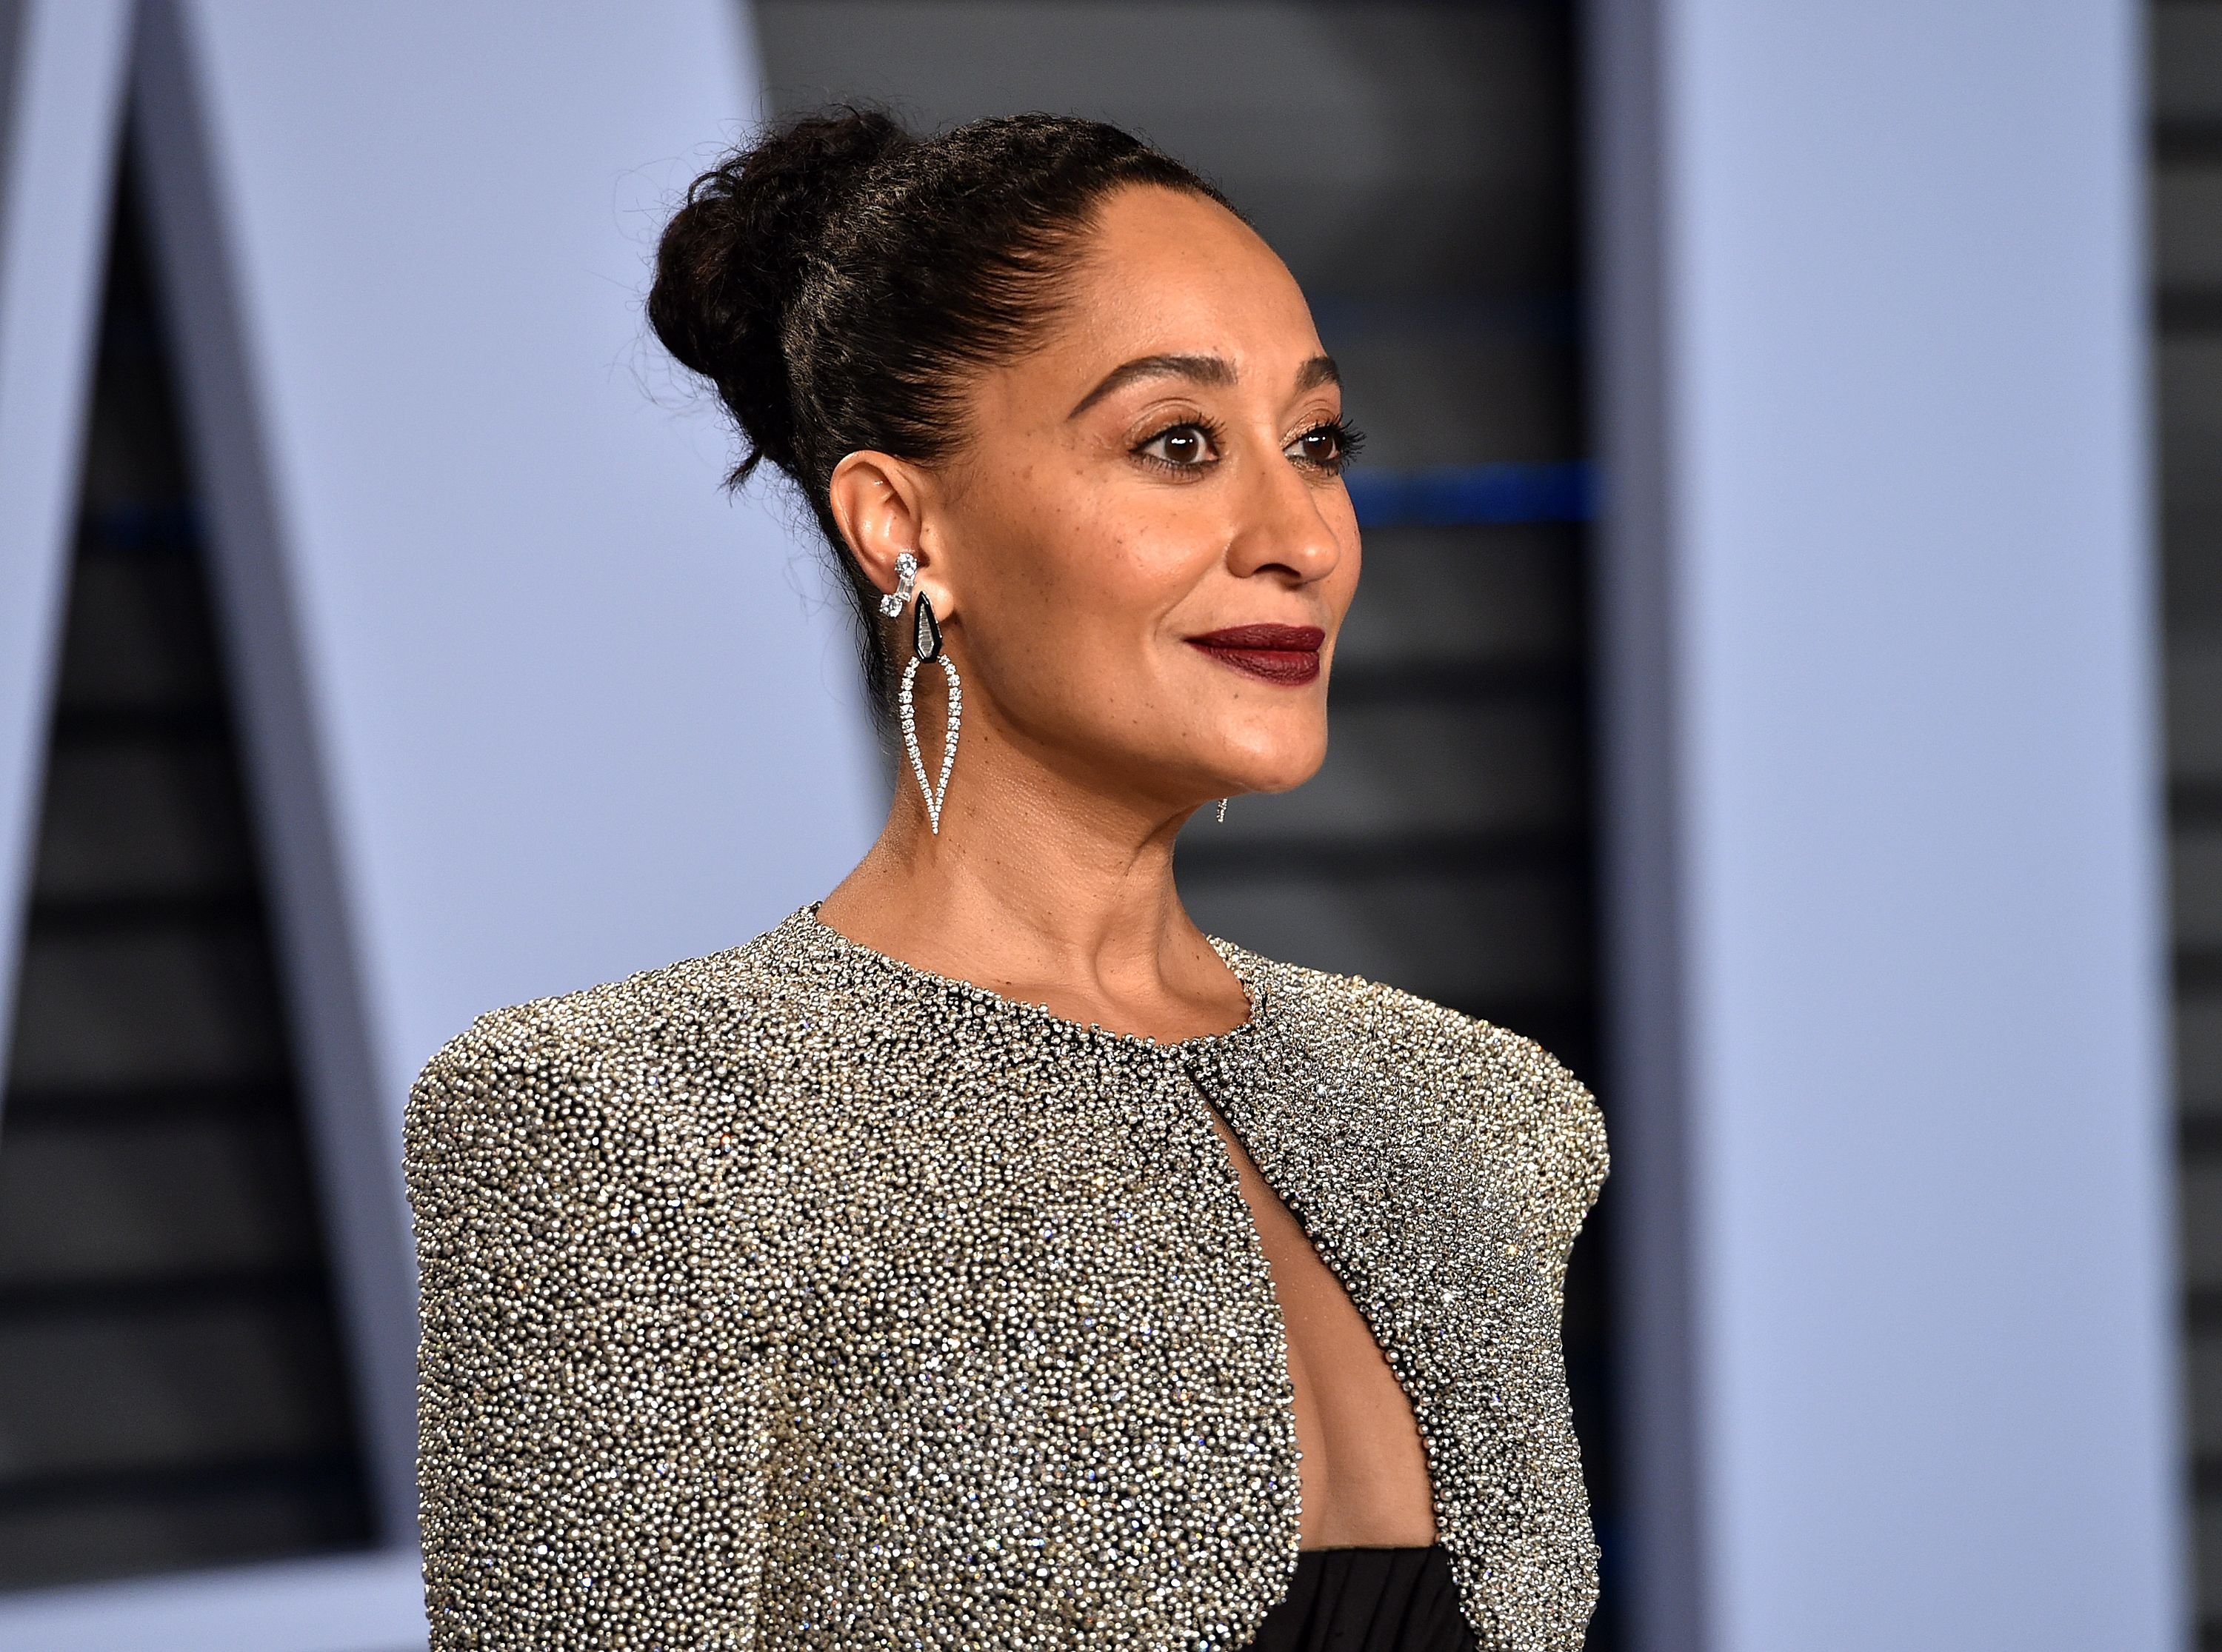 Tracee Ellis Ross during the Vanity Fair Oscar Party on March 4, 2018 in Beverly Hills, California. | Source: Getty Images